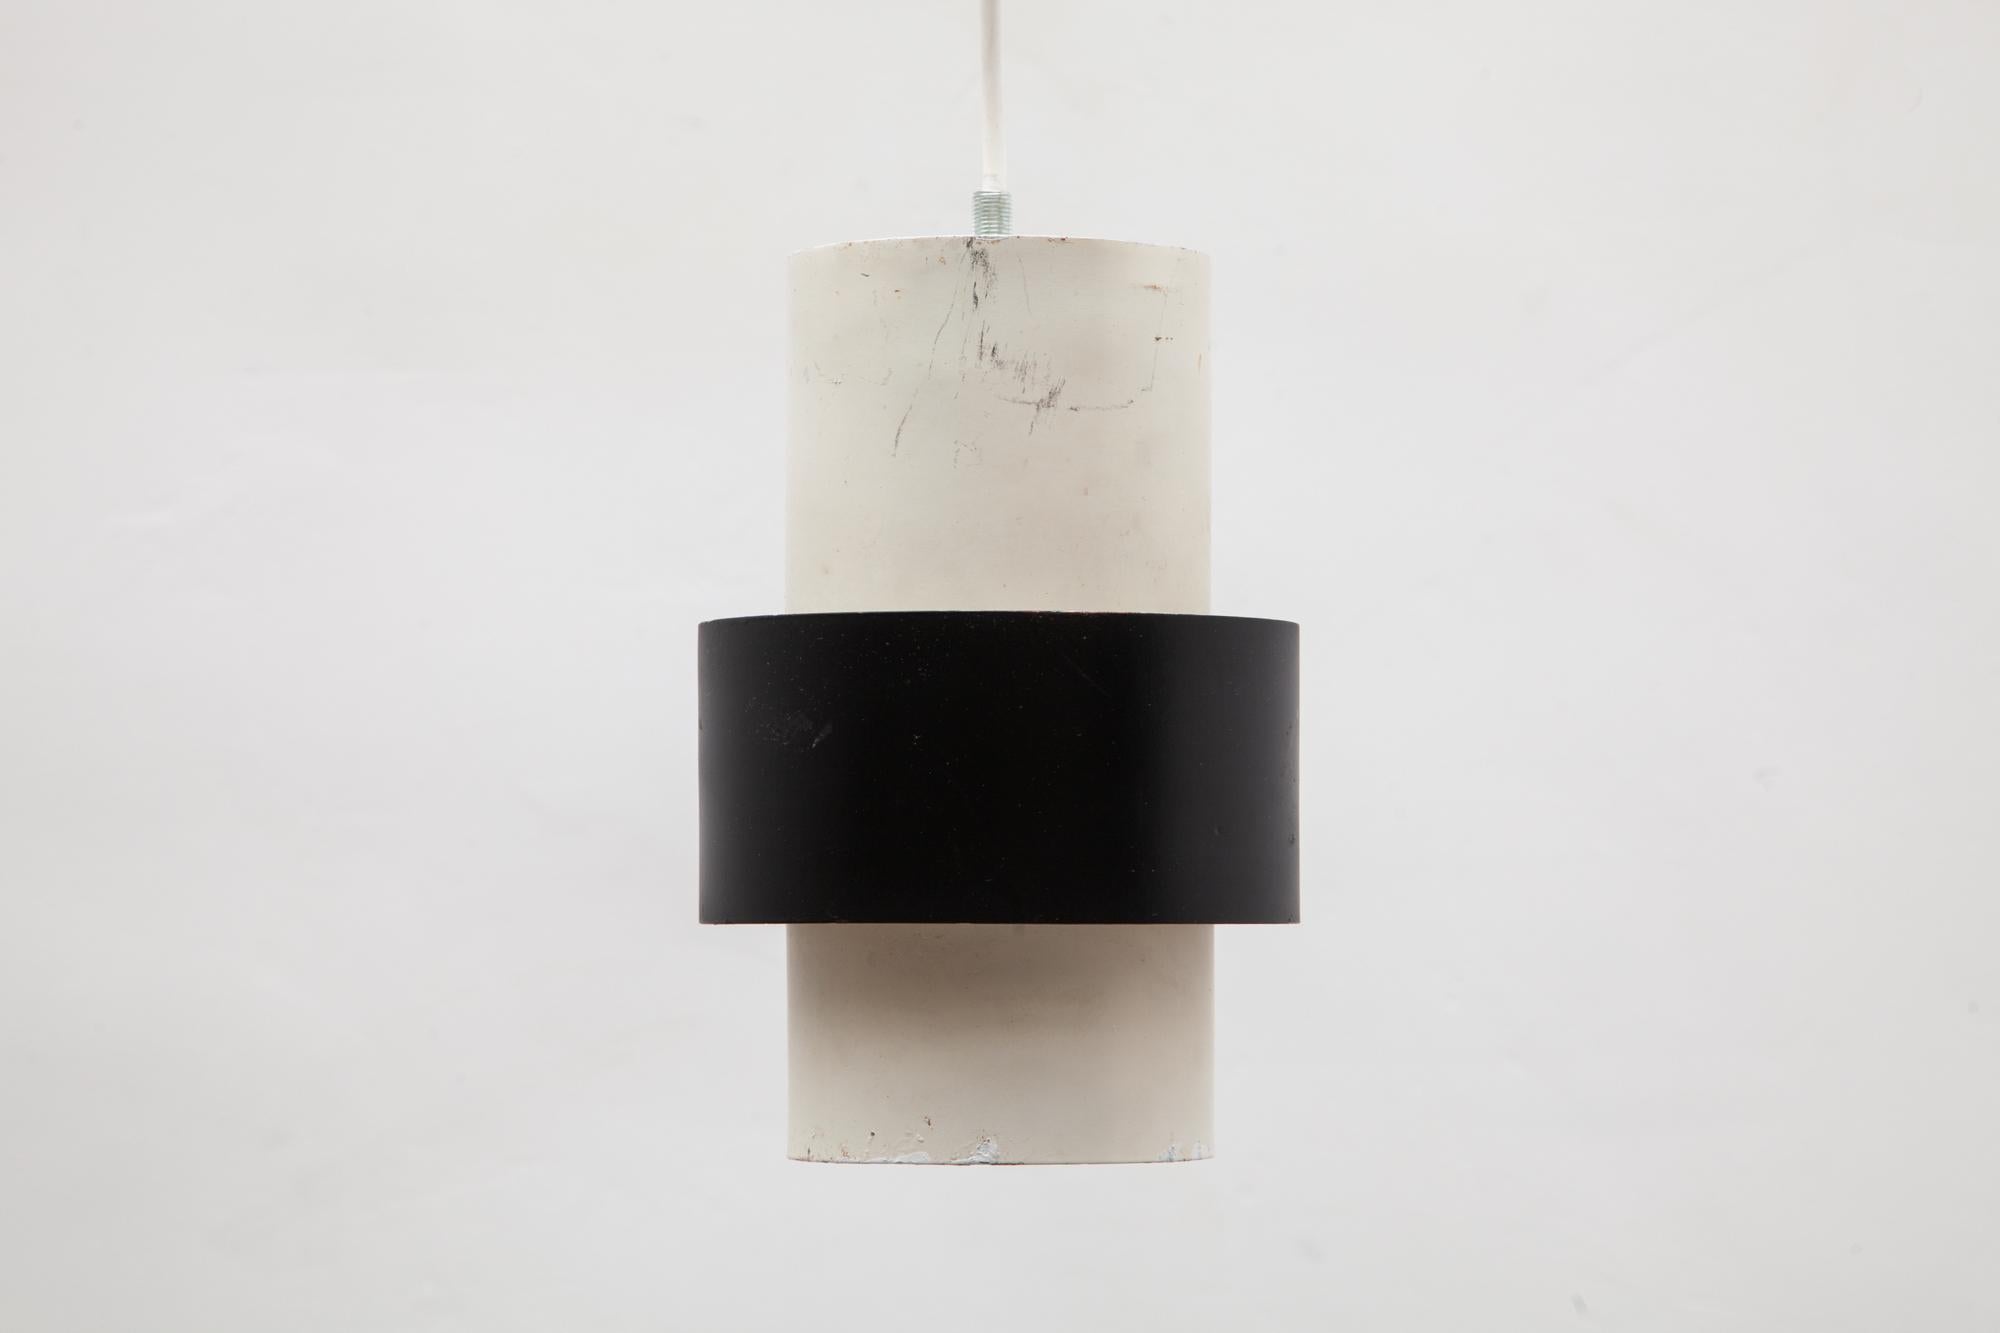 Mid-Century Modern Dutch Design Black and White Pendant Lamp 1960s, by Philips For Sale